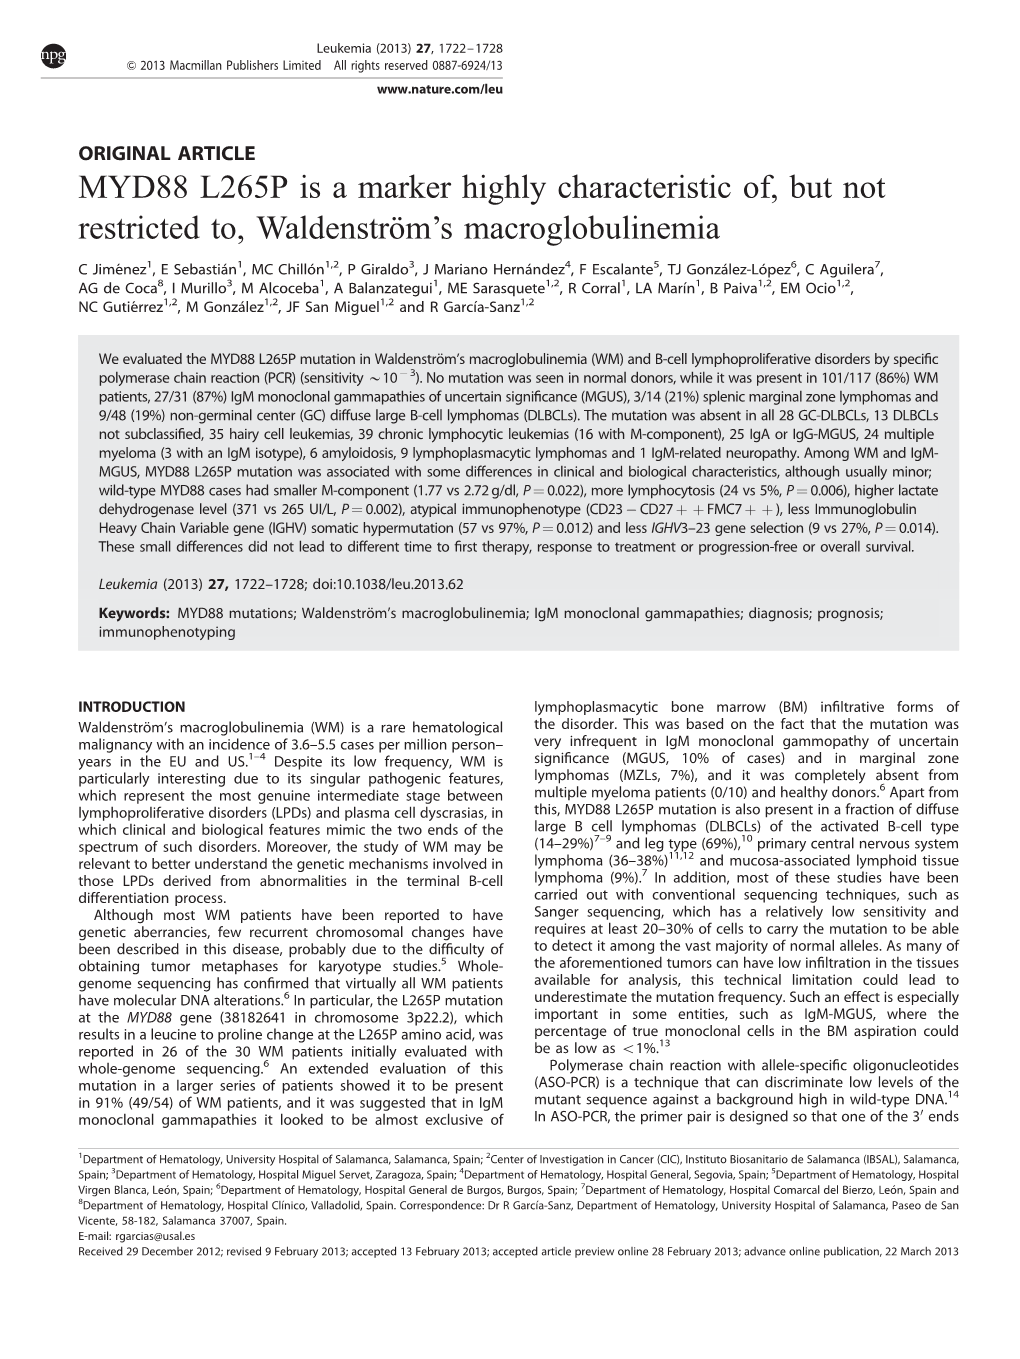 MYD88 L265P Is a Marker Highly Characteristic Of, but Not Restricted To, Waldenstro¨M’S Macroglobulinemia